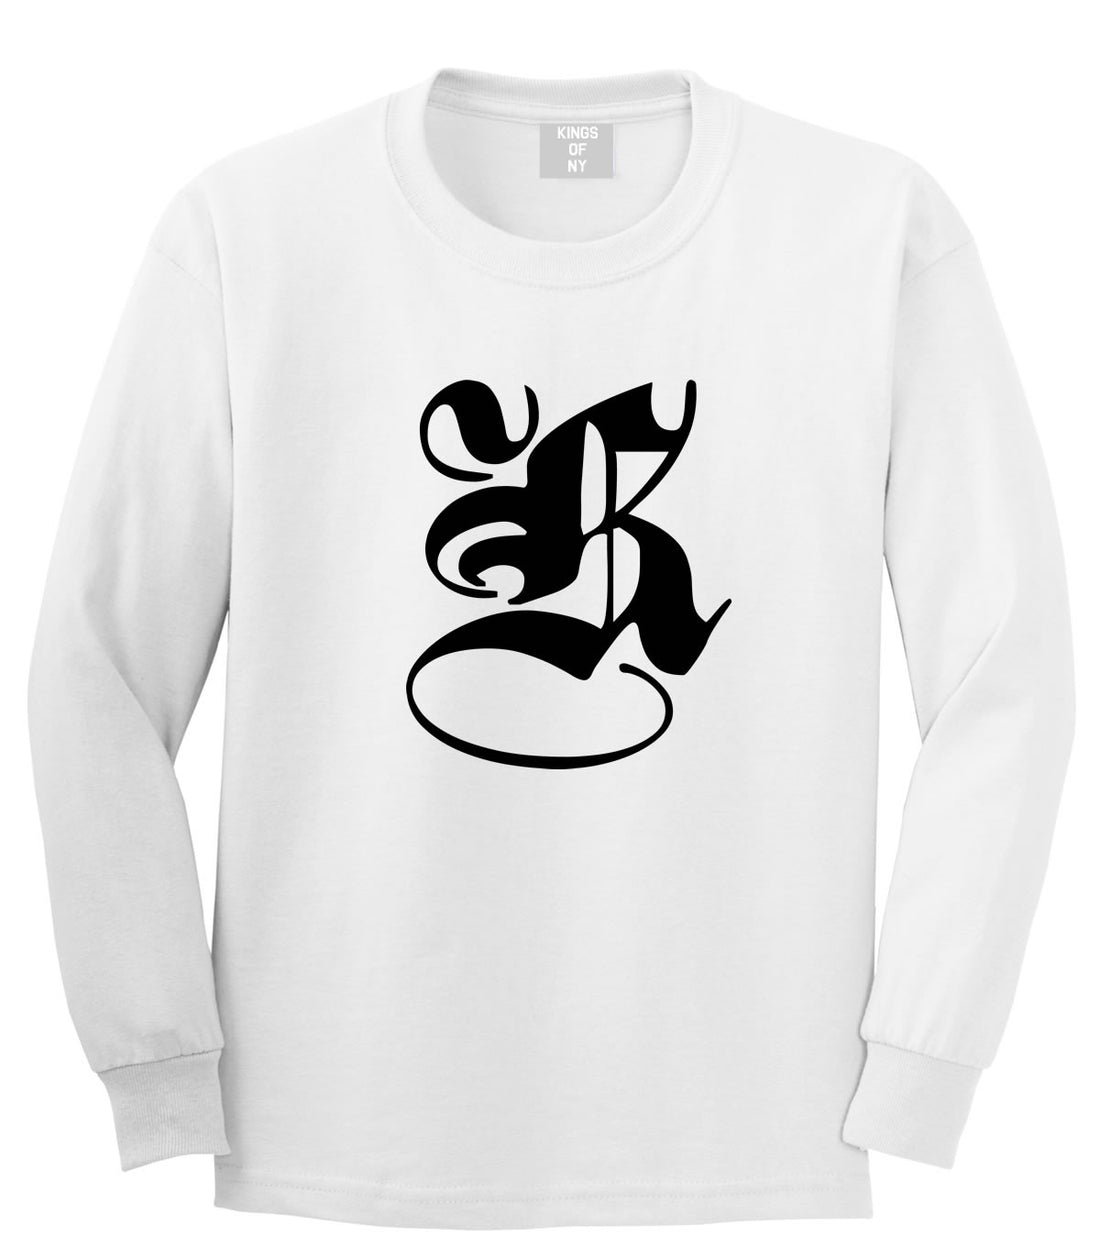 Kings Of NY K Gothic Style Long Sleeve T-Shirt in White